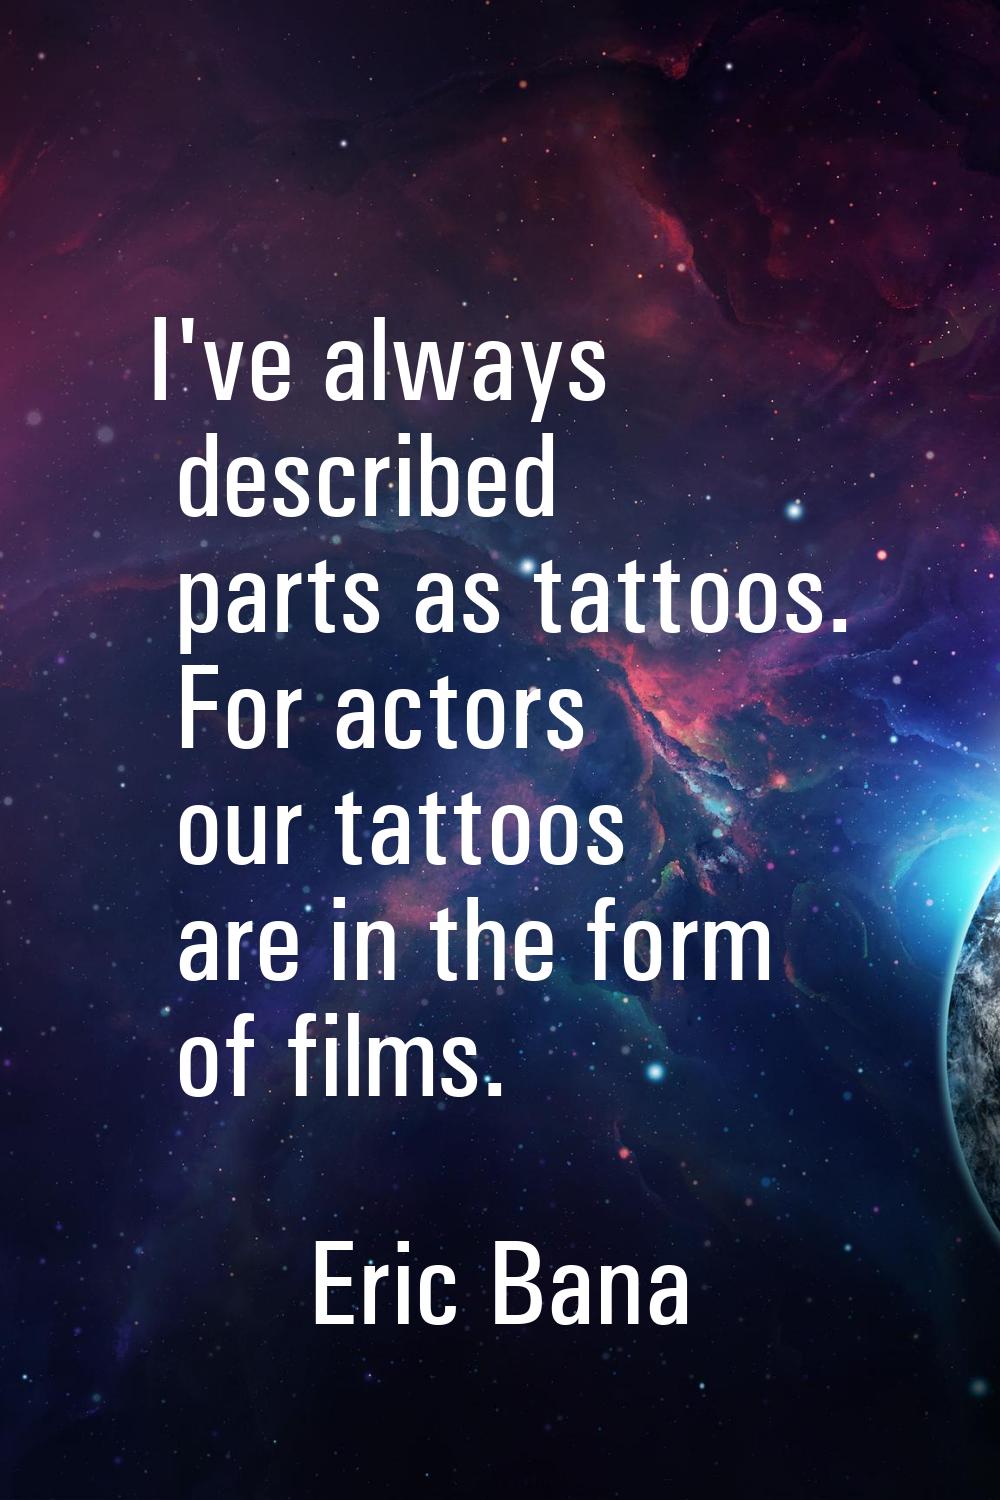 I've always described parts as tattoos. For actors our tattoos are in the form of films.